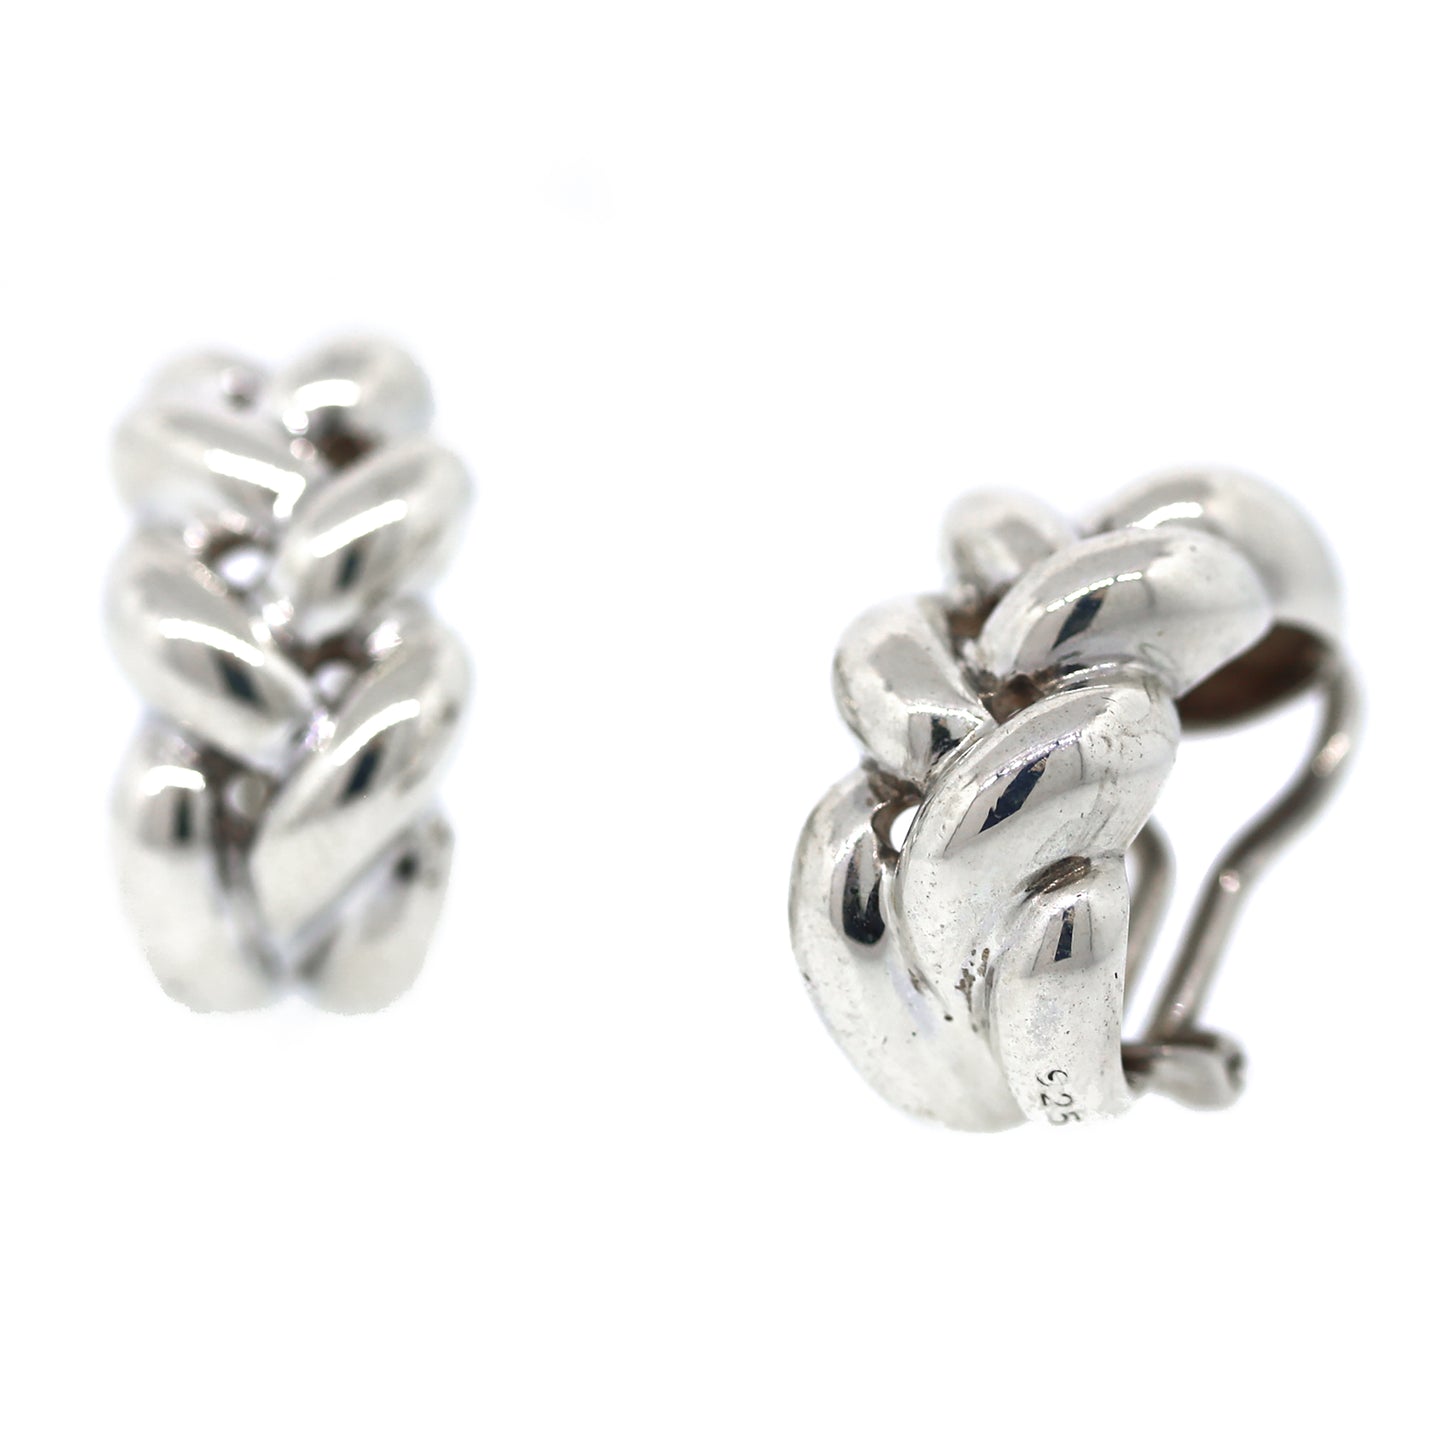 Tiffany and Co. Twisted Braided Earrings in Sterling Silver